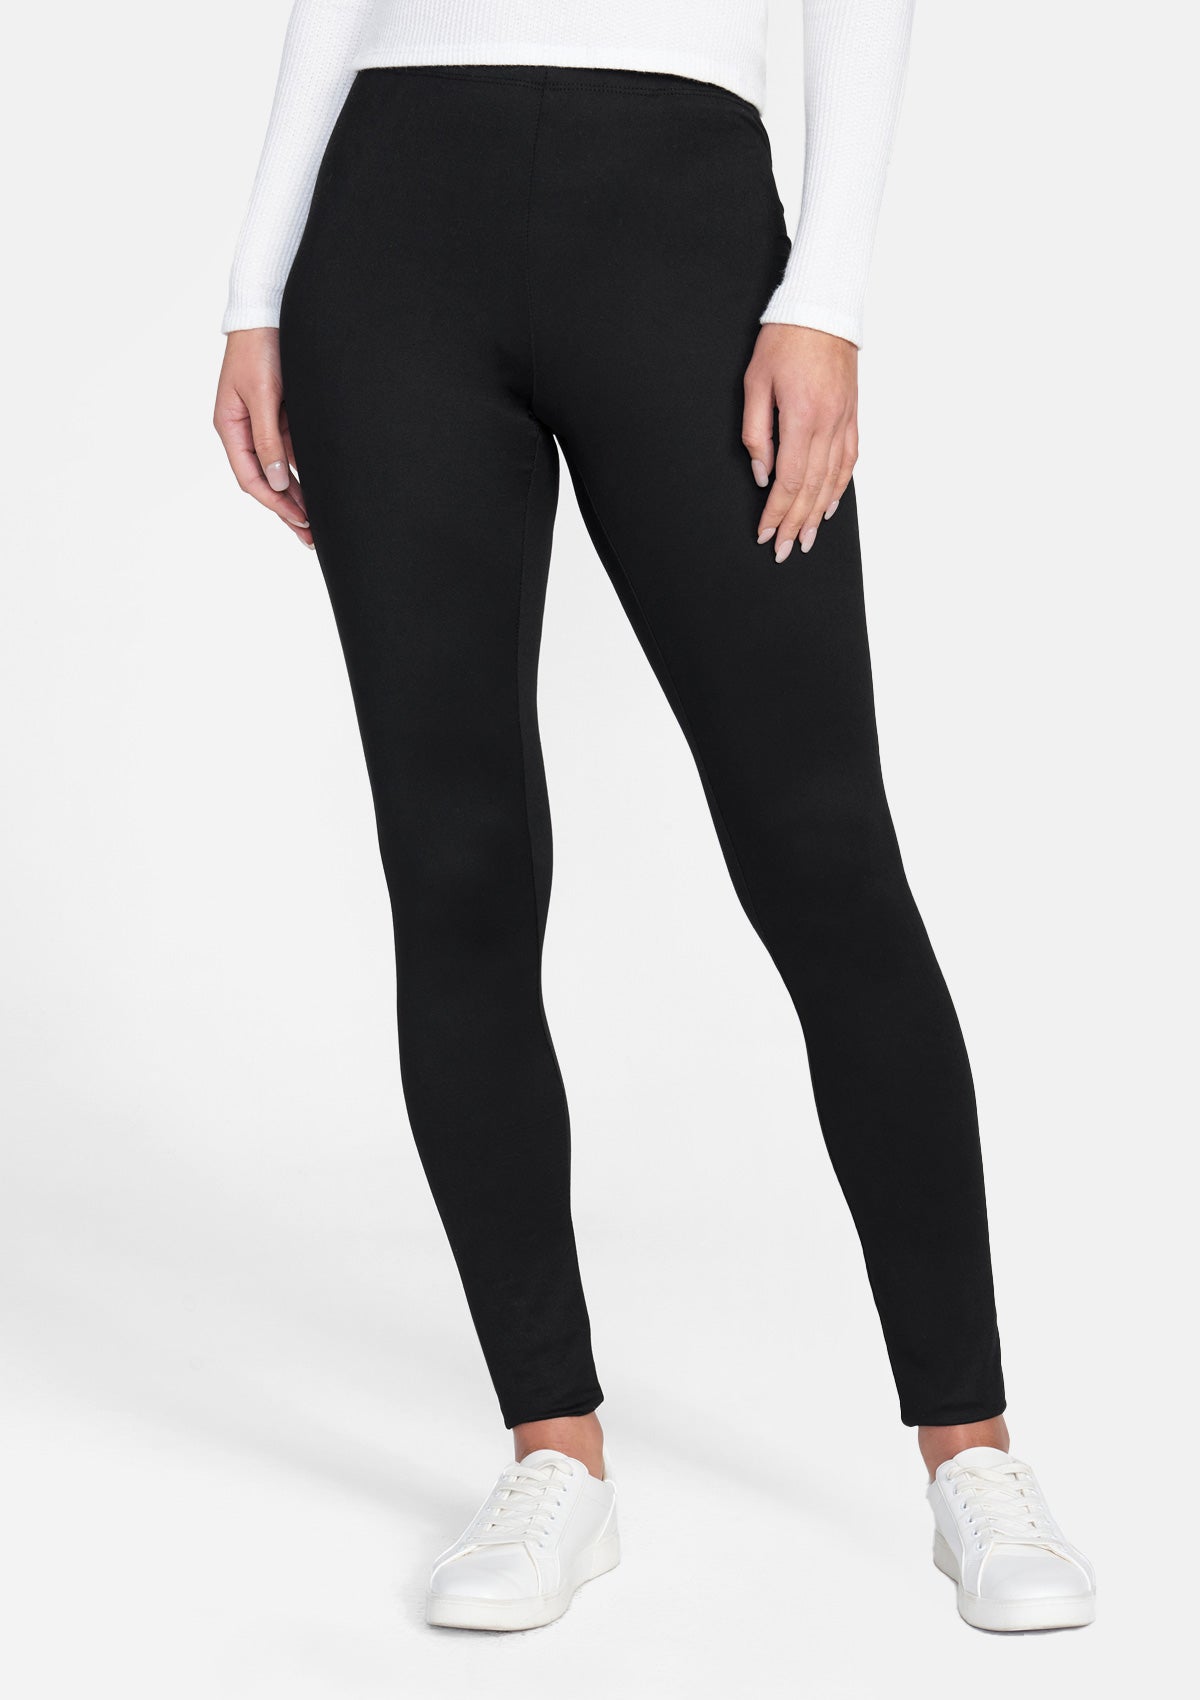 Alloy Apparel Tall Ashley Active Leggings for Women in Black Size M length  35